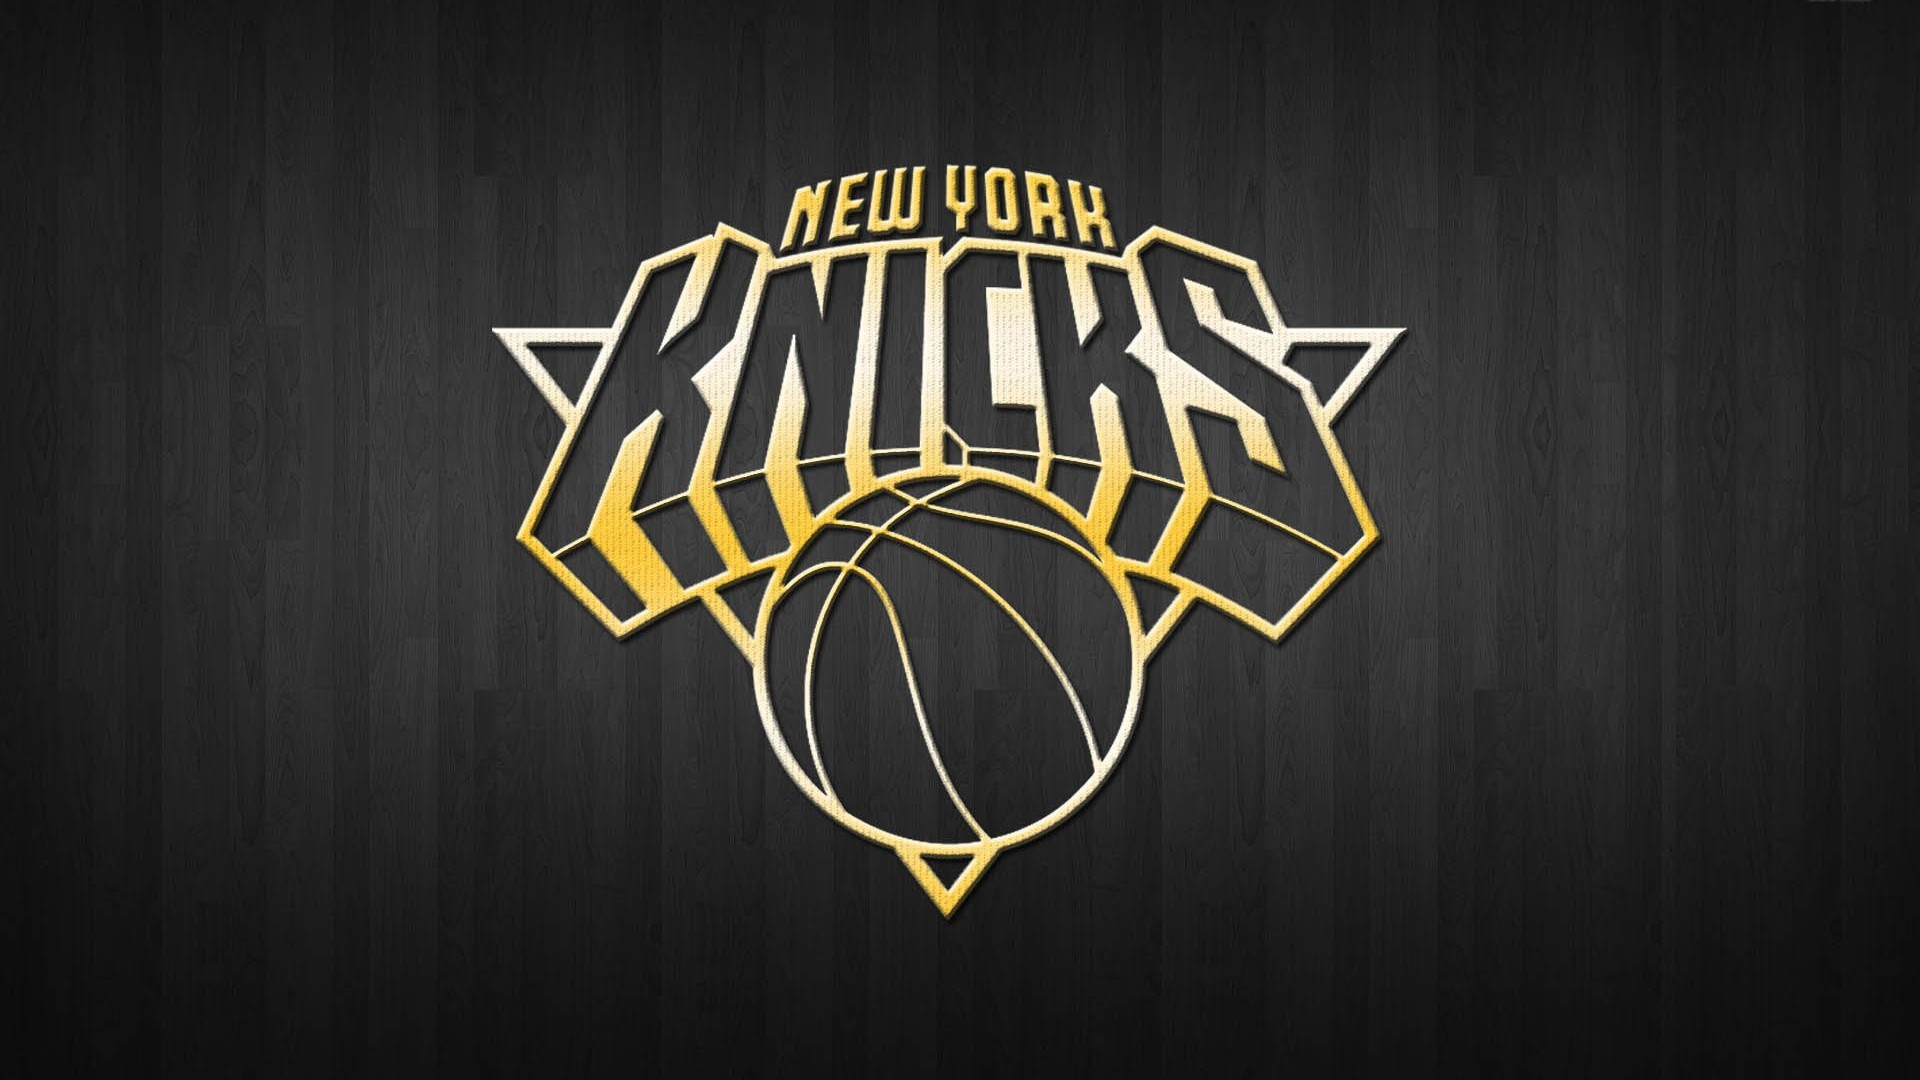 Wallpaper Desktop NY Knicks HD with image dimensions 1920x1080 pixel. You can make this wallpaper for your Desktop Computer Backgrounds, Windows or Mac Screensavers, iPhone Lock screen, Tablet or Android and another Mobile Phone device